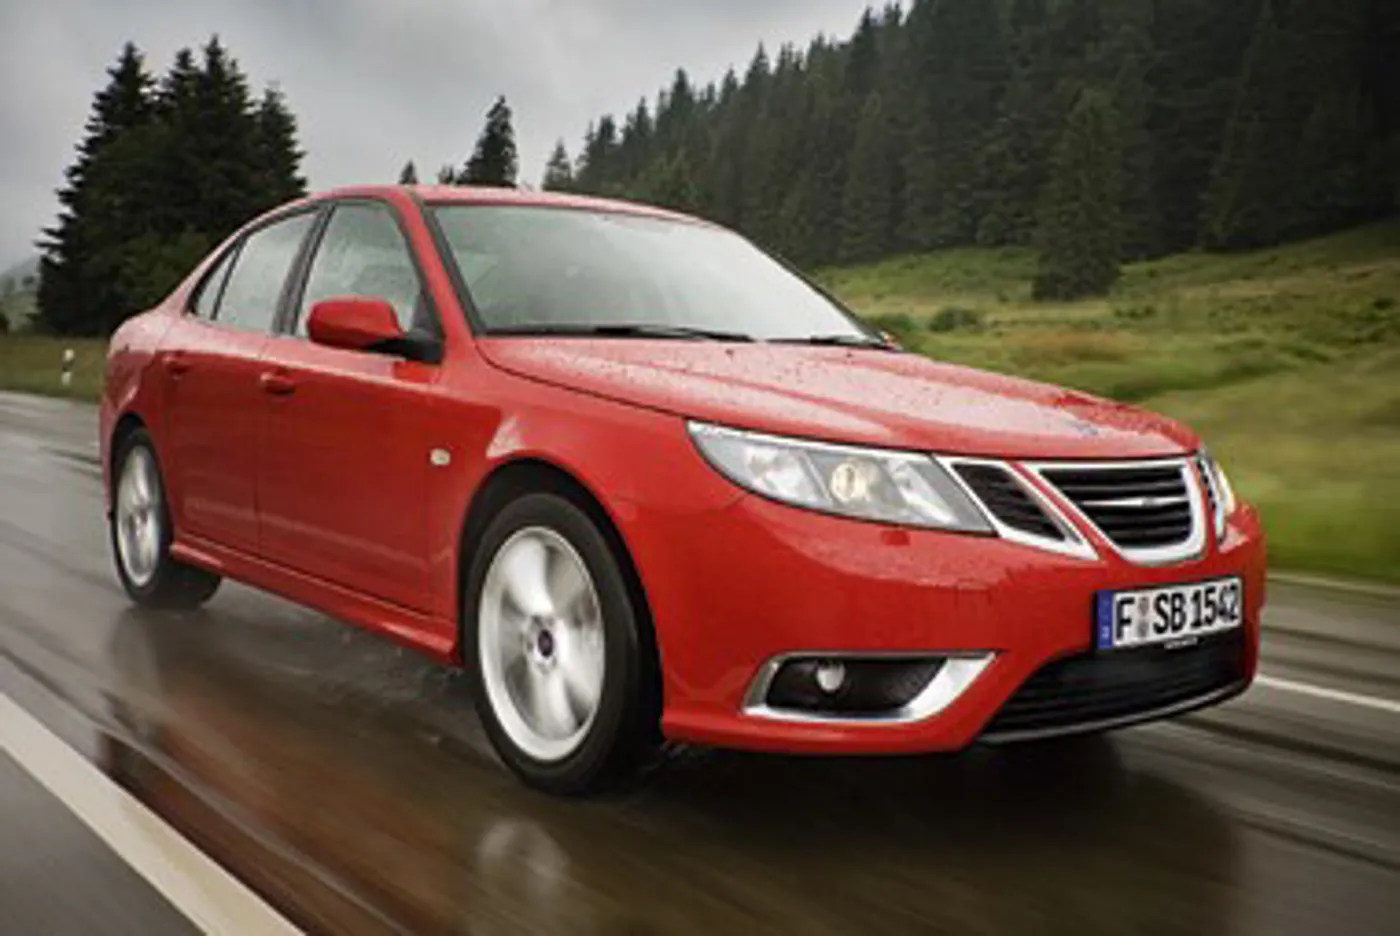 2008 Saab 9-3 : Latest Prices, Reviews, Specs, Photos and Incentives